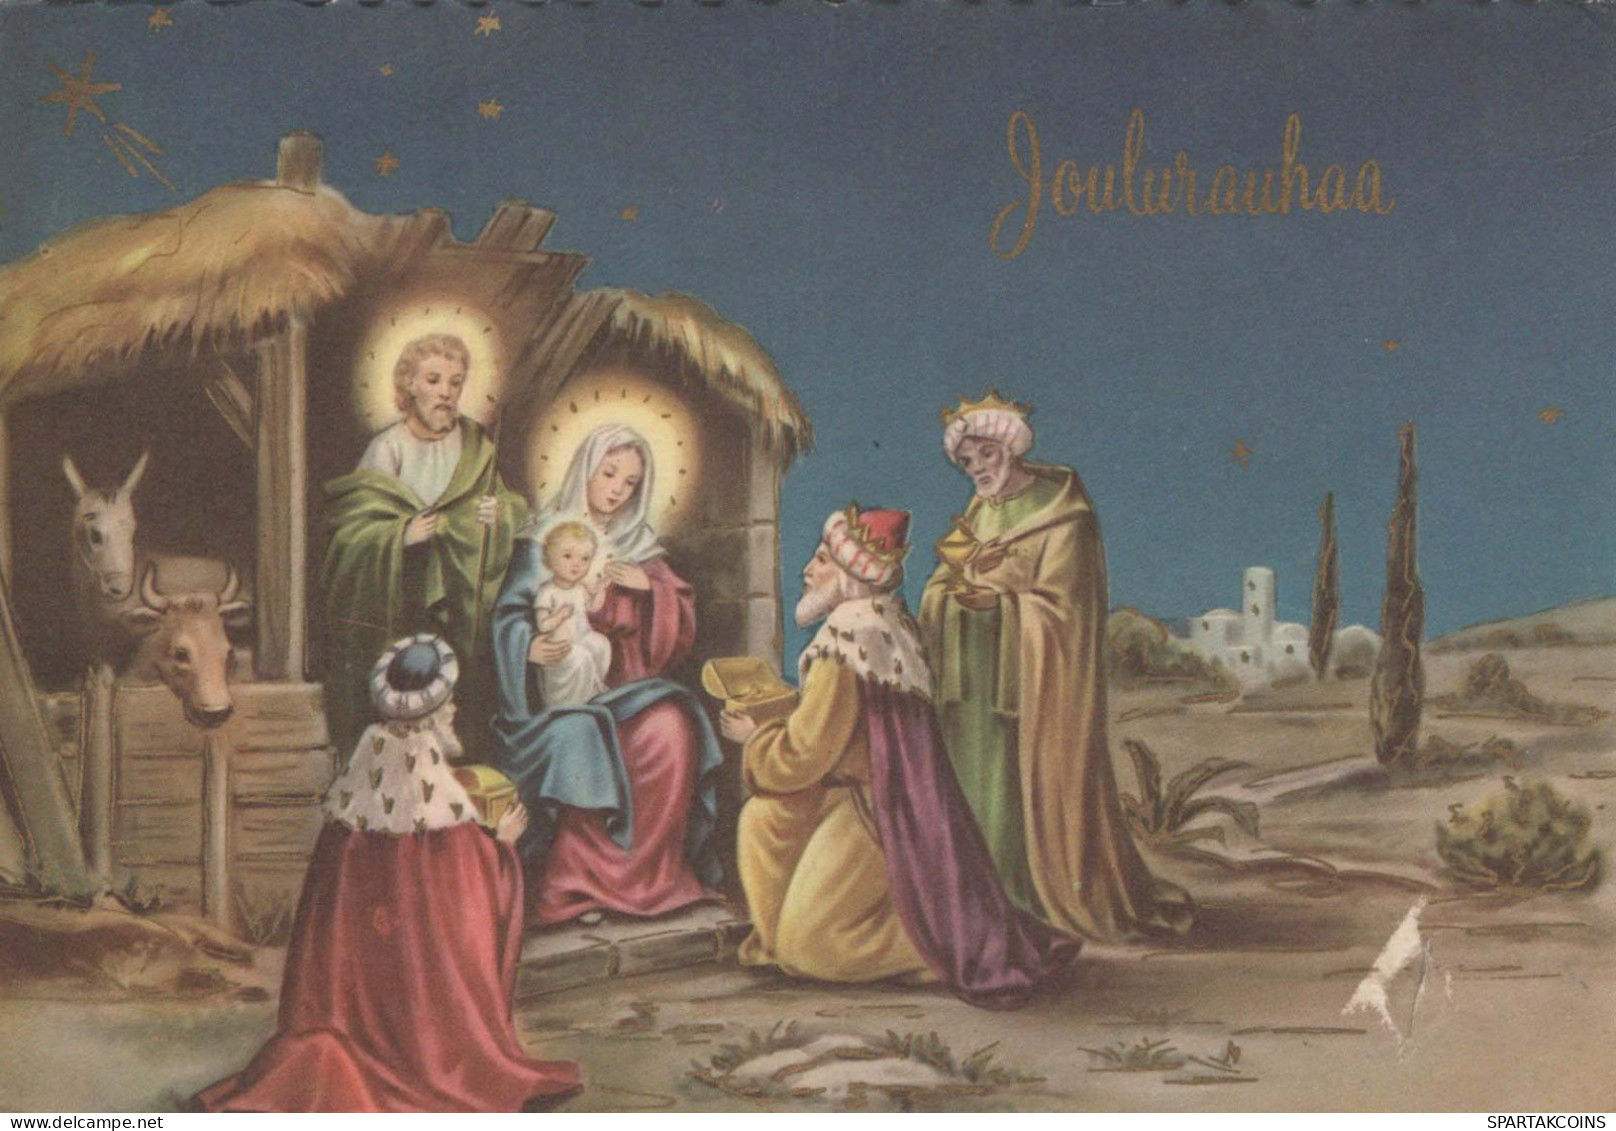 Virgen Mary Madonna Baby JESUS Christmas Religion Vintage Postcard CPSM #PBB617.A - Vierge Marie & Madones